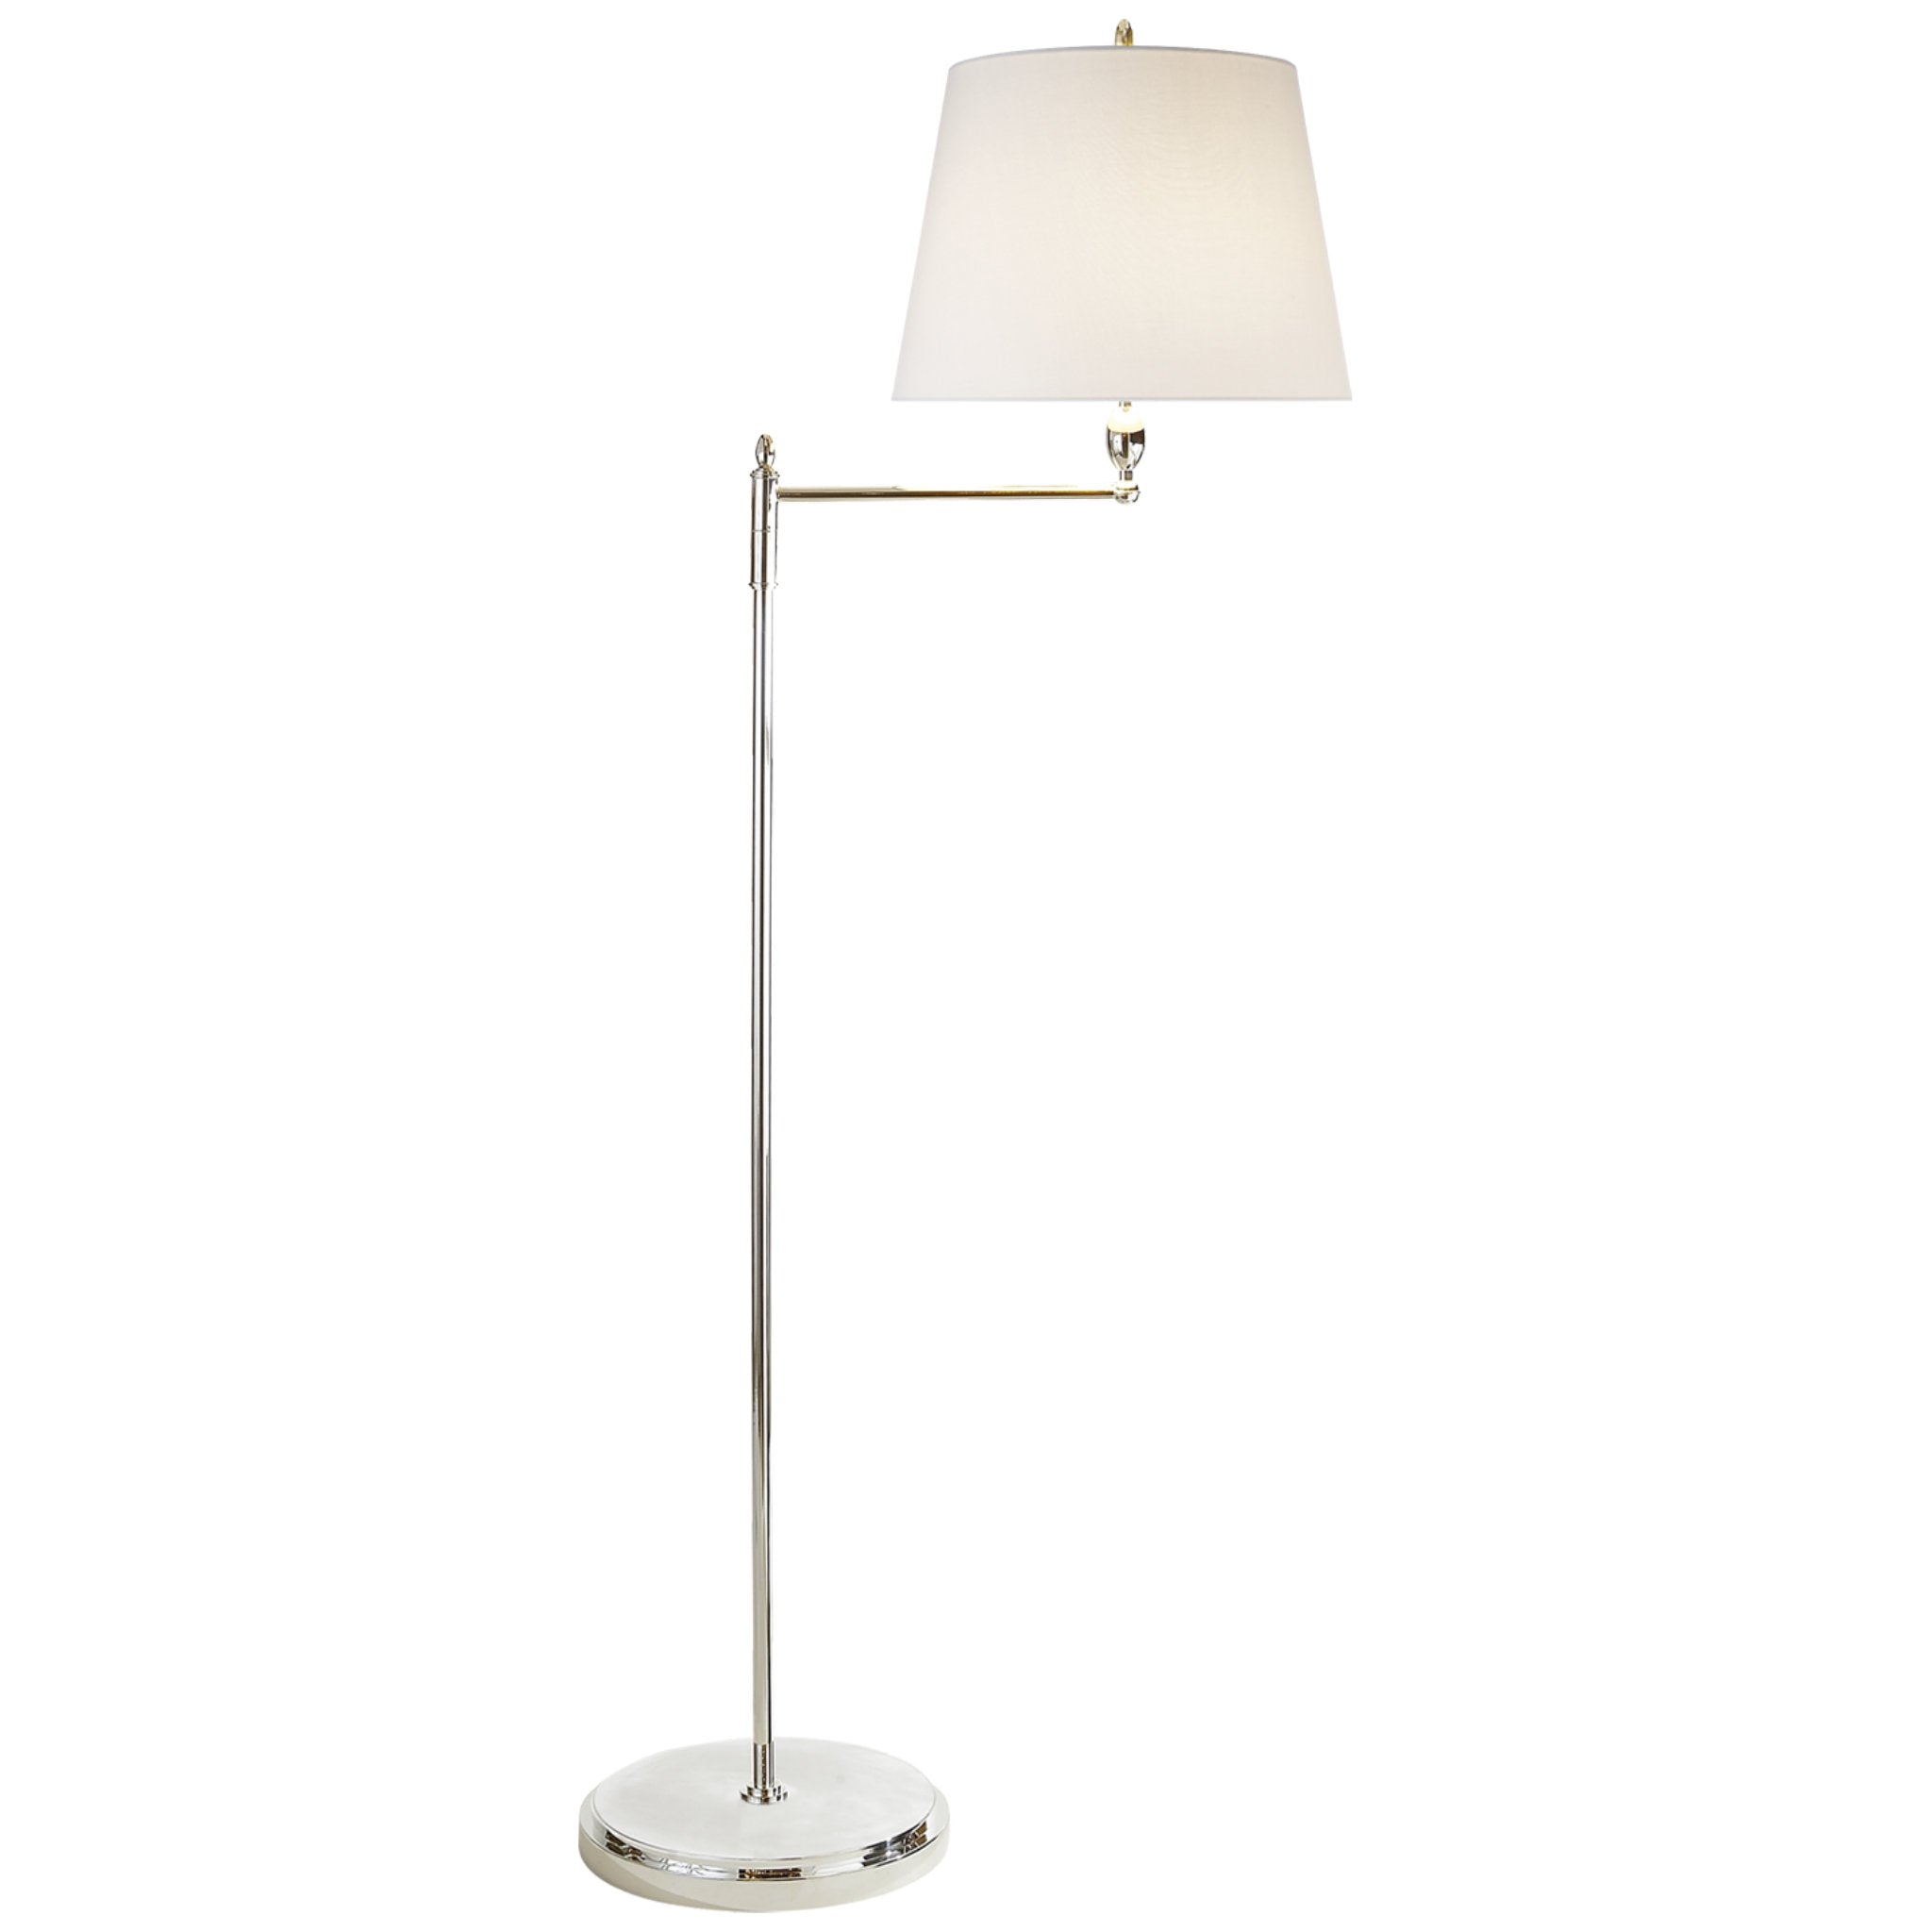 Thomas O'Brien Paulo Floor Light in Polished Nickel with Linen Shade